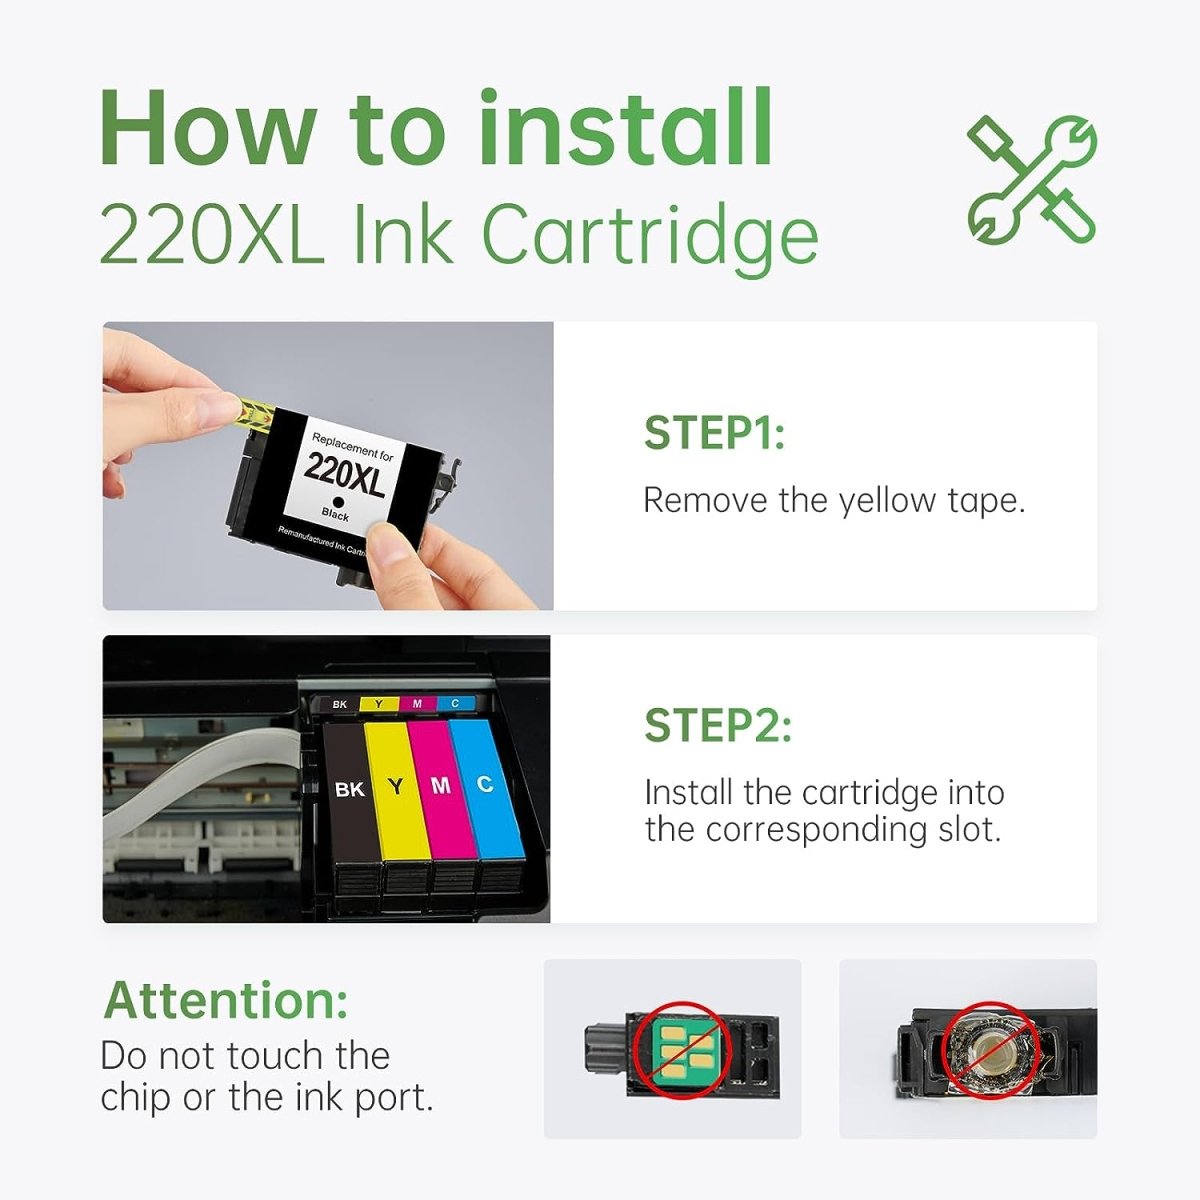 LRMERO 220XL ink cartridges Replacement for Epson T220XL 4 Black - Linford Office:Printer Ink & Toner Cartridge